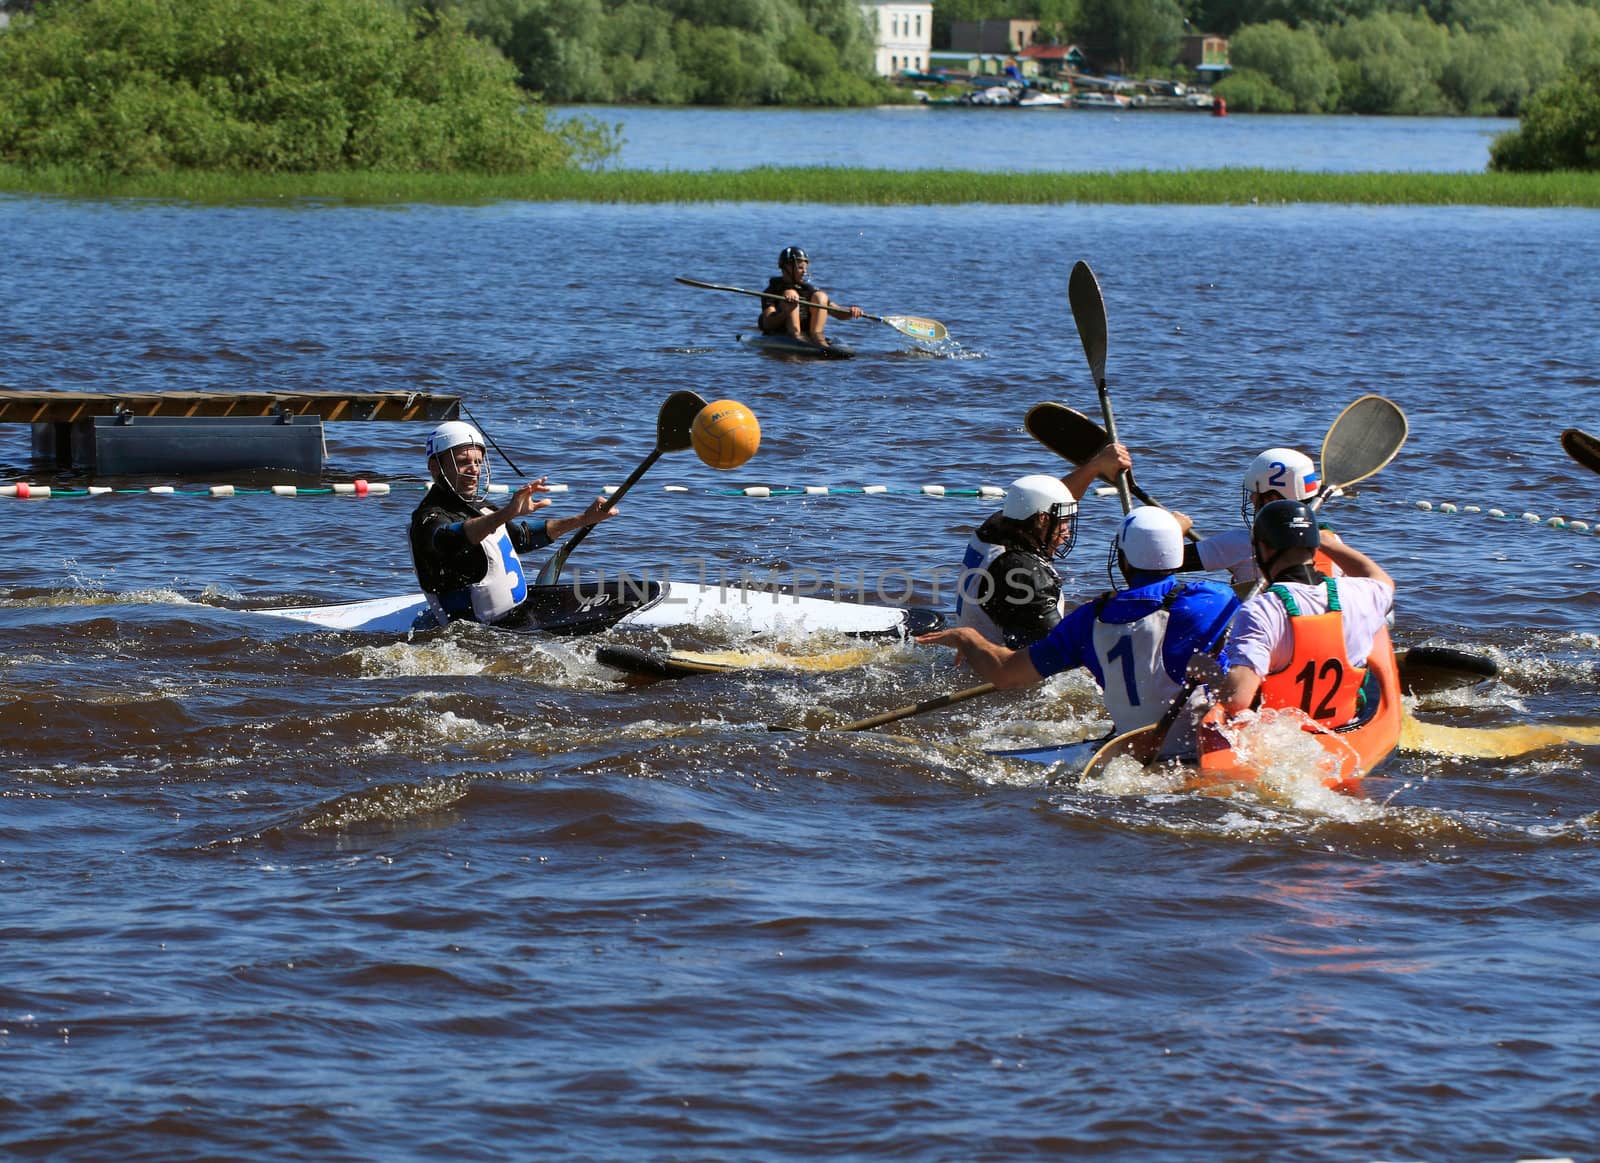 VELIKIJ NOVGOROD, RUSSIA - JUNE 10: The second stage of the Cup of Russia in canoe polo in Velikij Novgorod, Russia at June 10, 2012